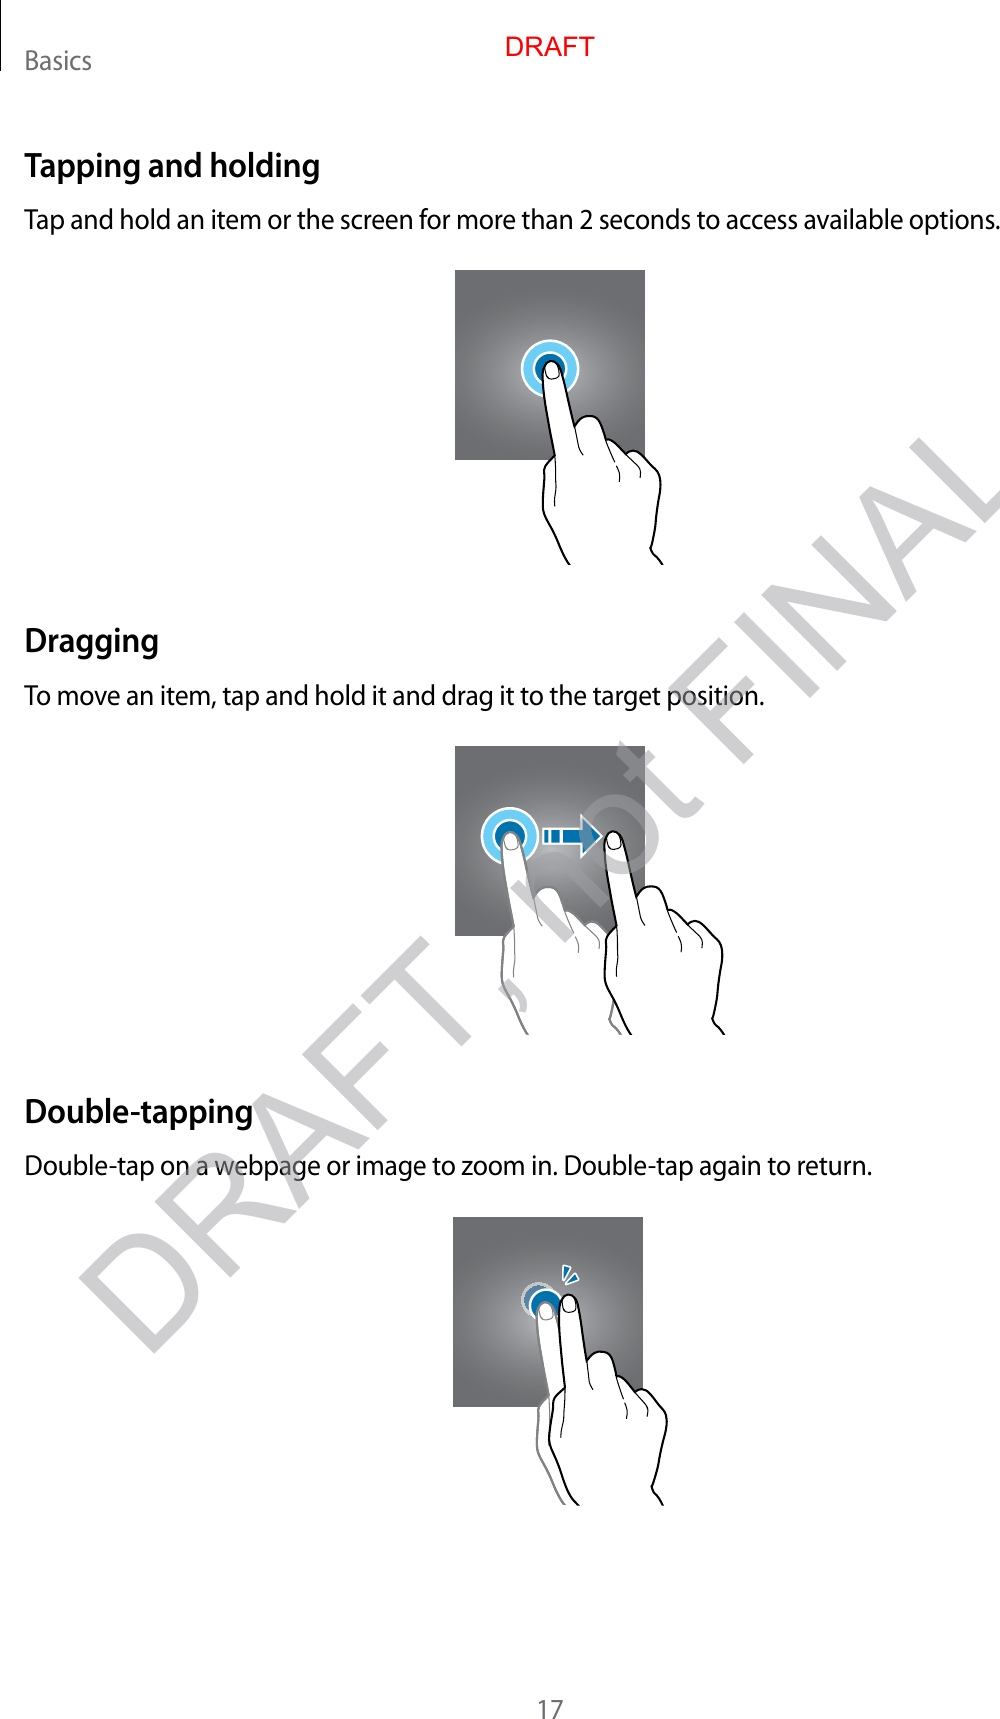 Basics17Tapping and holdingTap and hold an item or the screen f or mor e than 2 sec onds to ac cess a v ailable options .DraggingTo move an it em, tap and hold it and dr ag it to the tar get position.Double-tappingDouble-tap on a webpage or image to zoom in. Double-tap again to return.DRAFTDRAFT, not FINAL